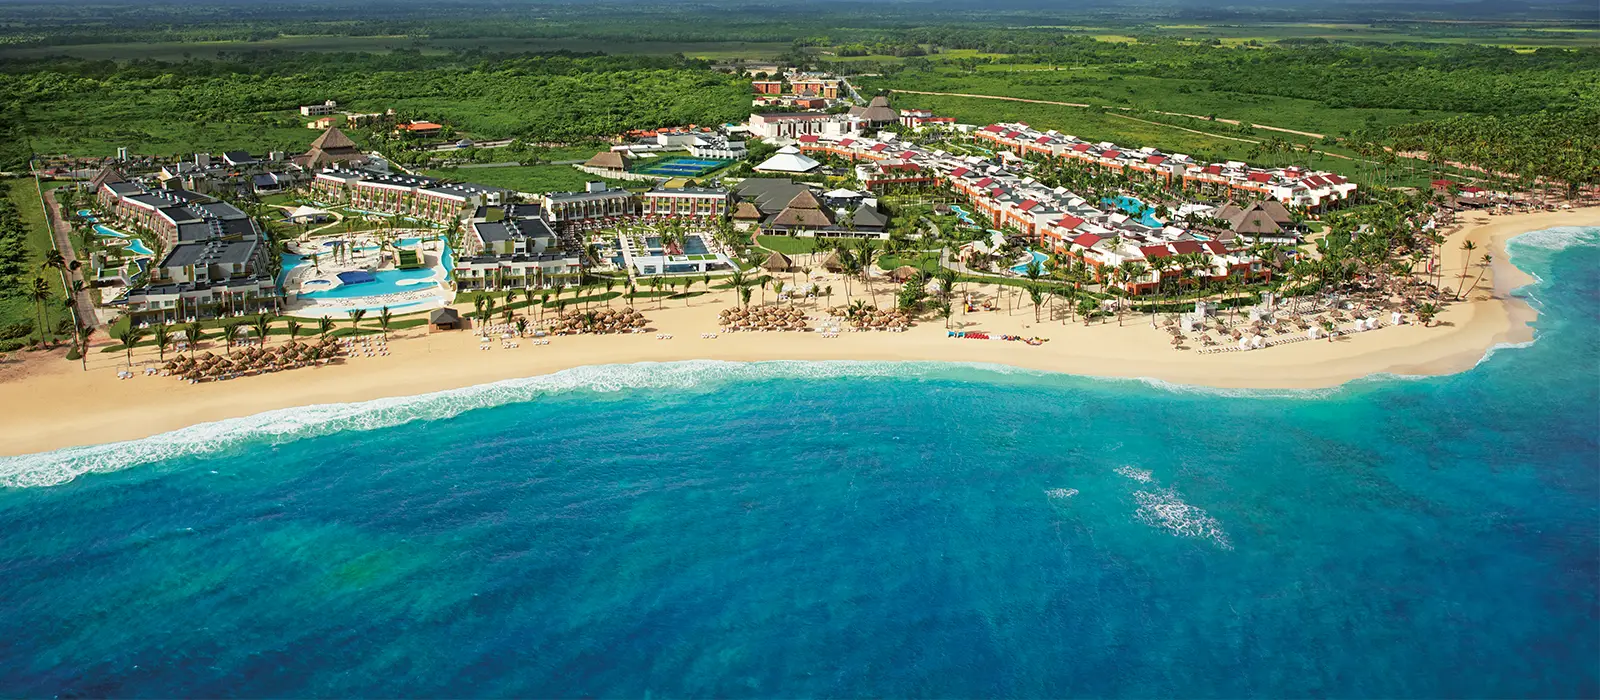 HEADER Now Onyx Dominican Republic Luxury Dominican Republic Holiday Packages 